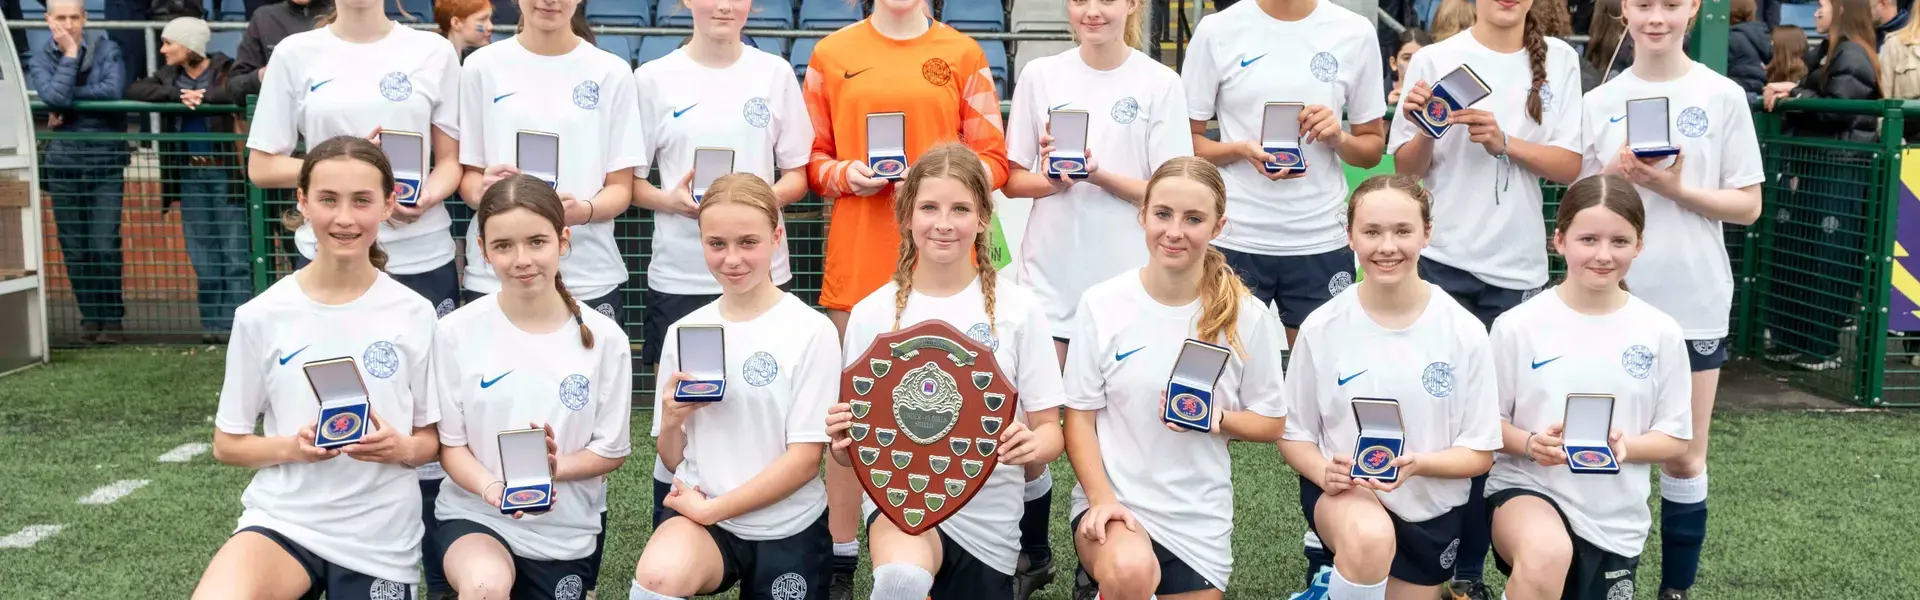 A huge congratulations to the Ibtsokc Place school, near Richmond, U15 Football girls’ team for securing victory in the 2024 ISFA Girls Shield finals with a 3-1 win against Rossall School.